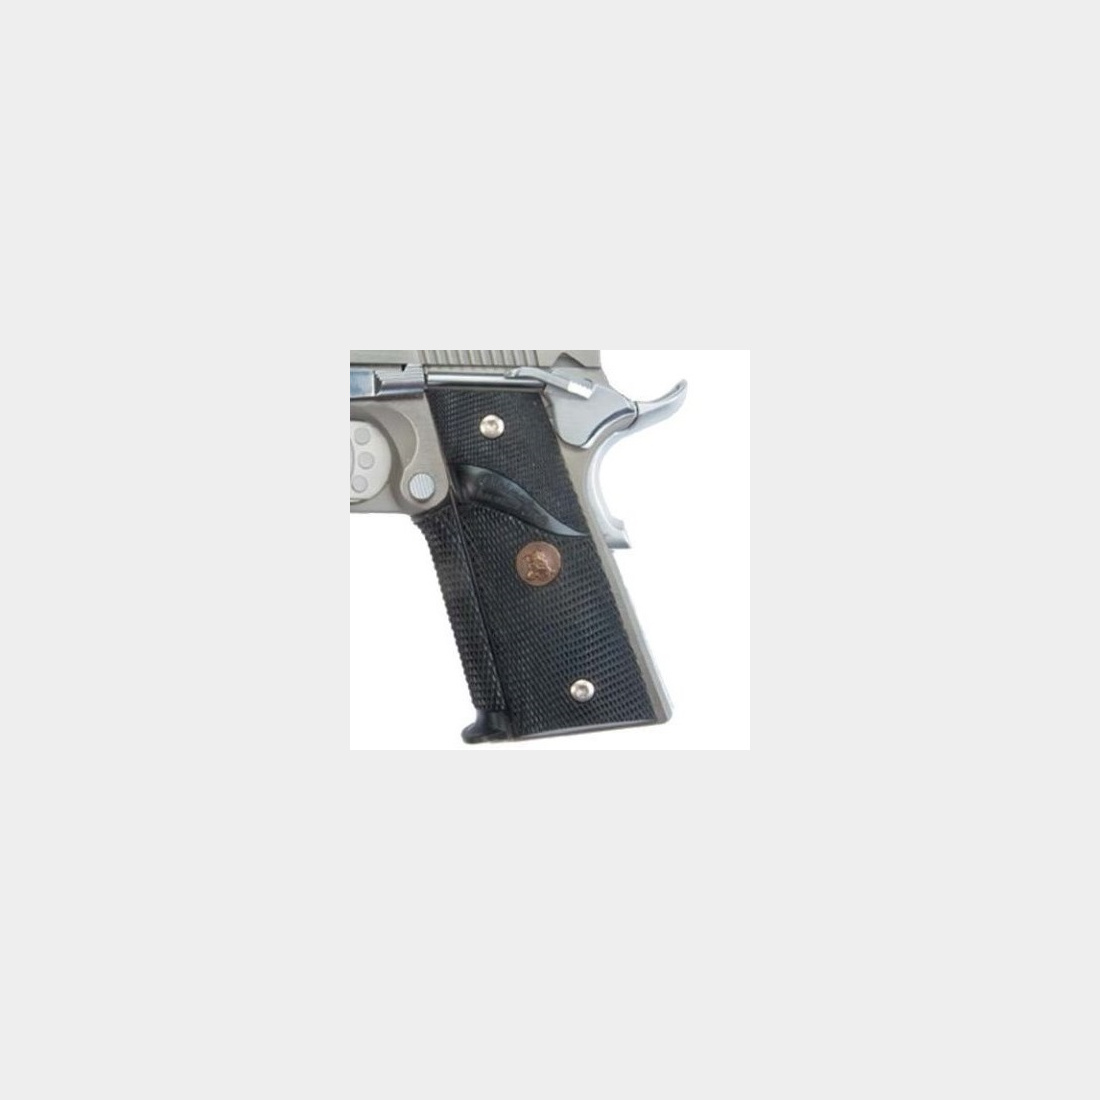 Pachmayr Griff Signature Colt 1911 MKIV S80